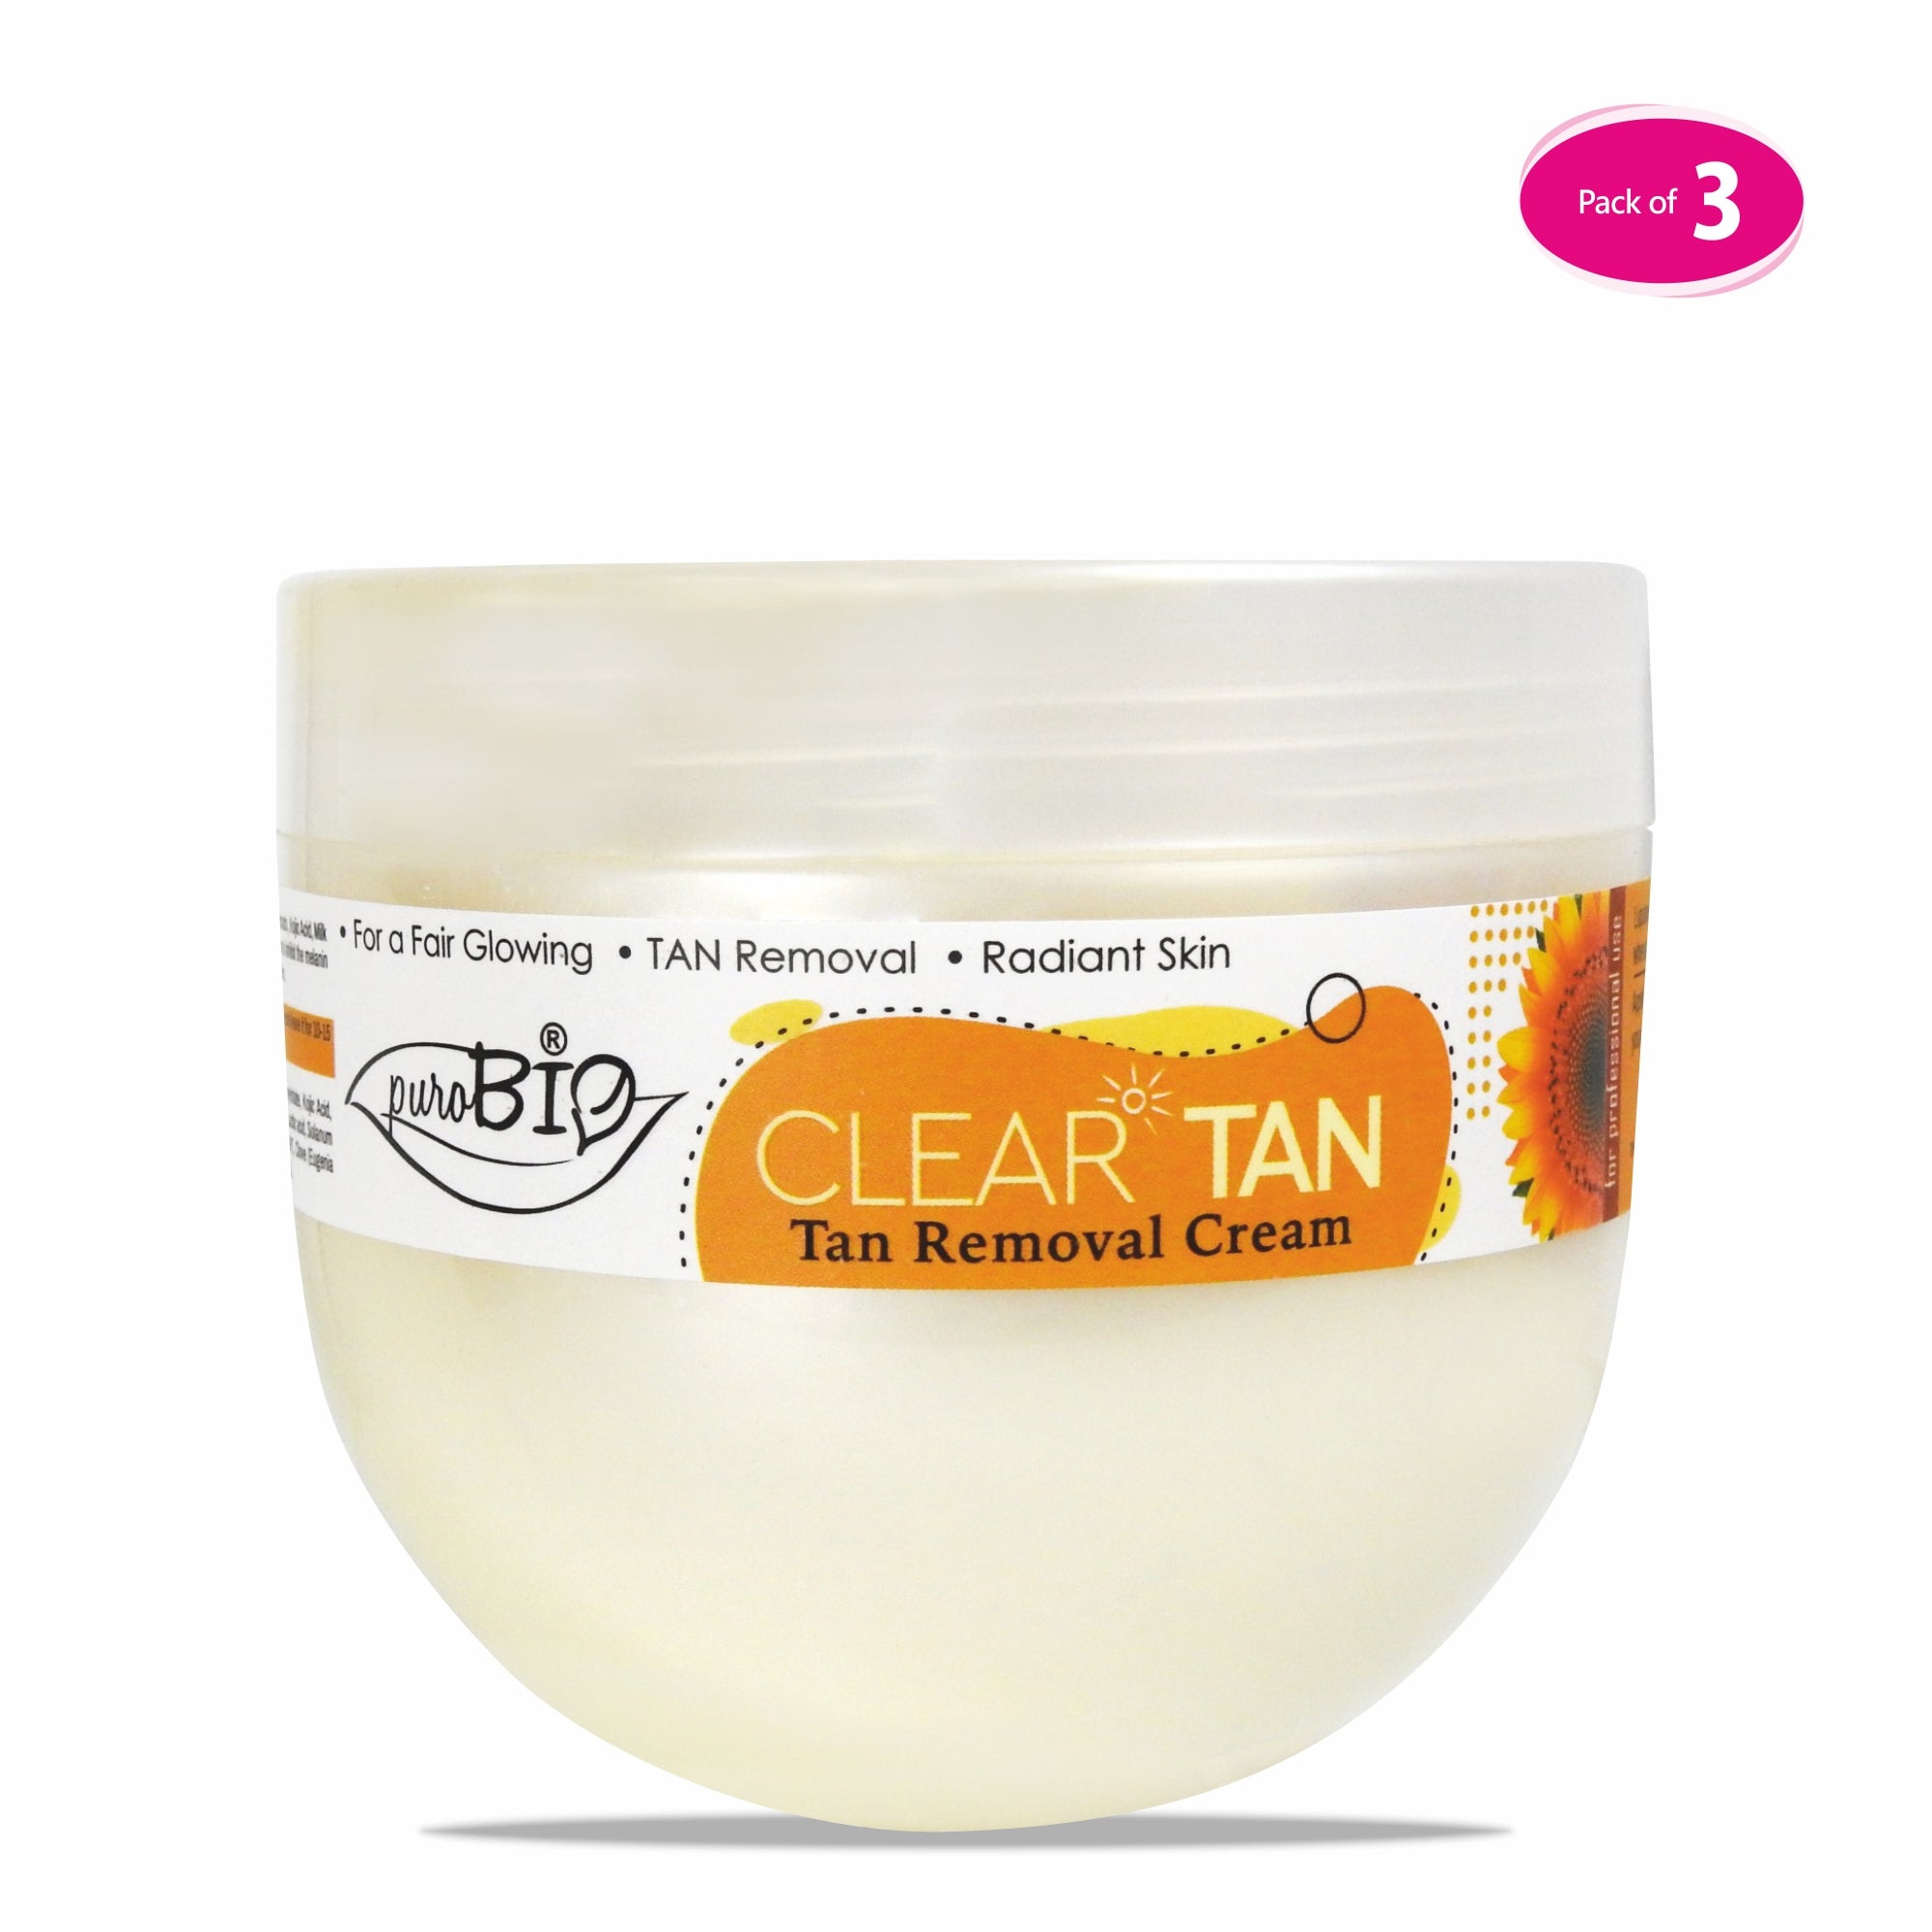 ClearTan Face Pack Best Tan removal Cream in bulk 3 quantity